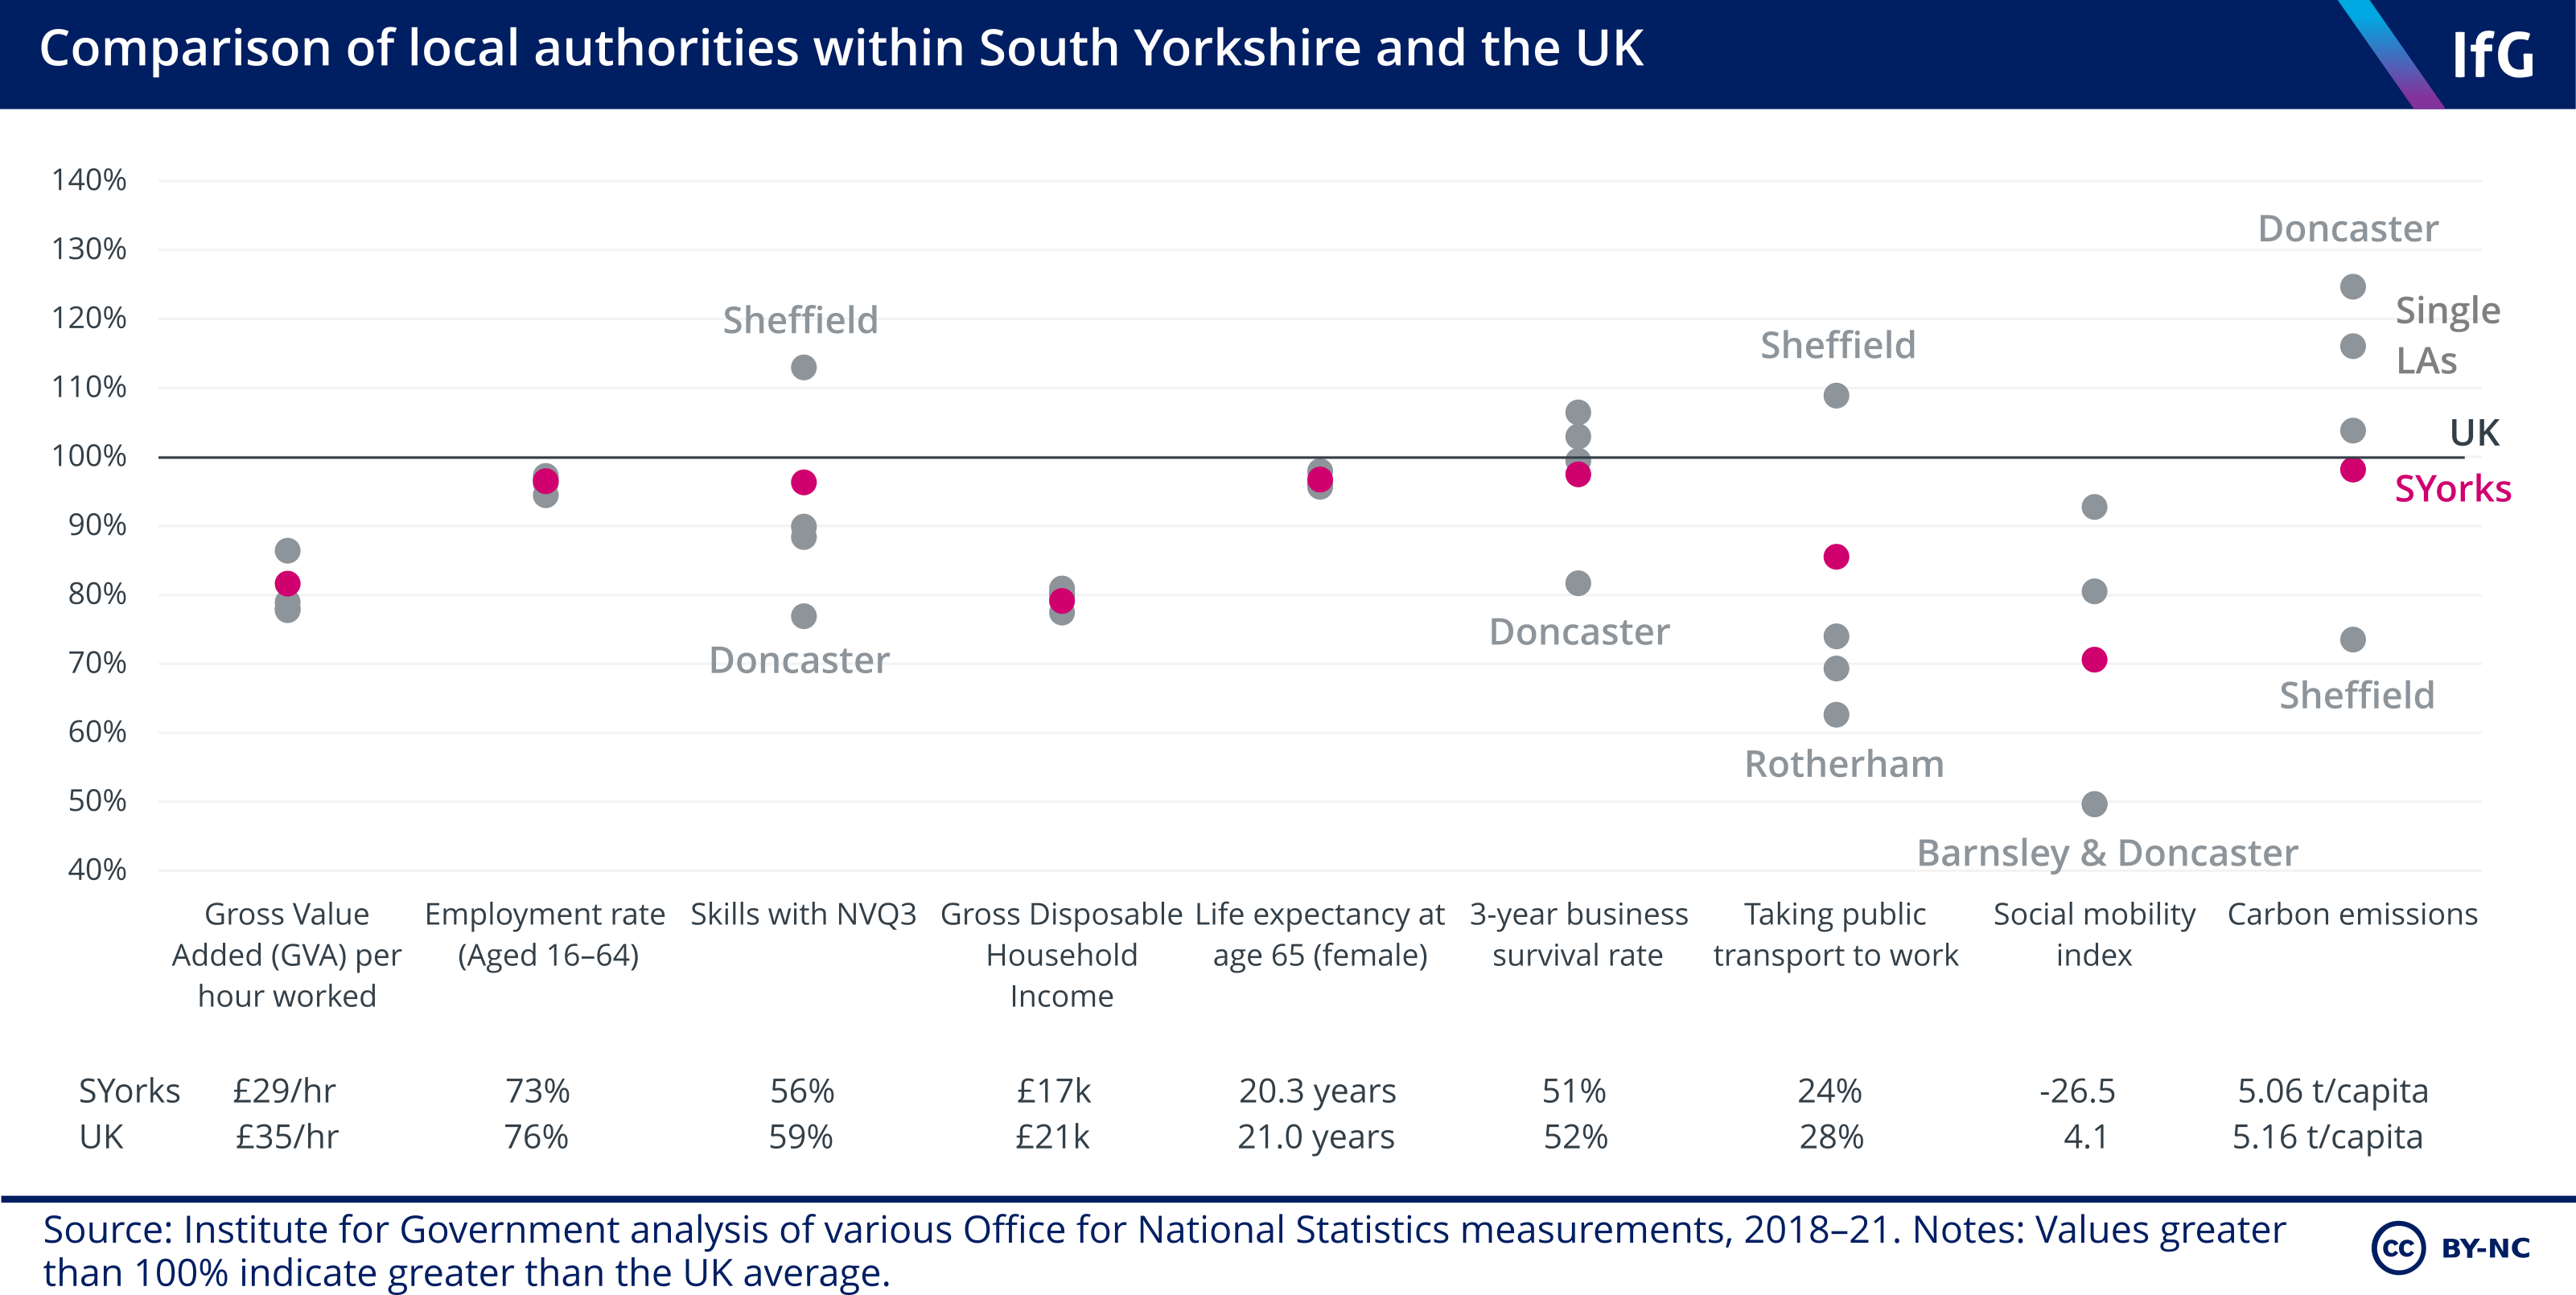 Comparison of local authorities within South Yorkshire and the UK